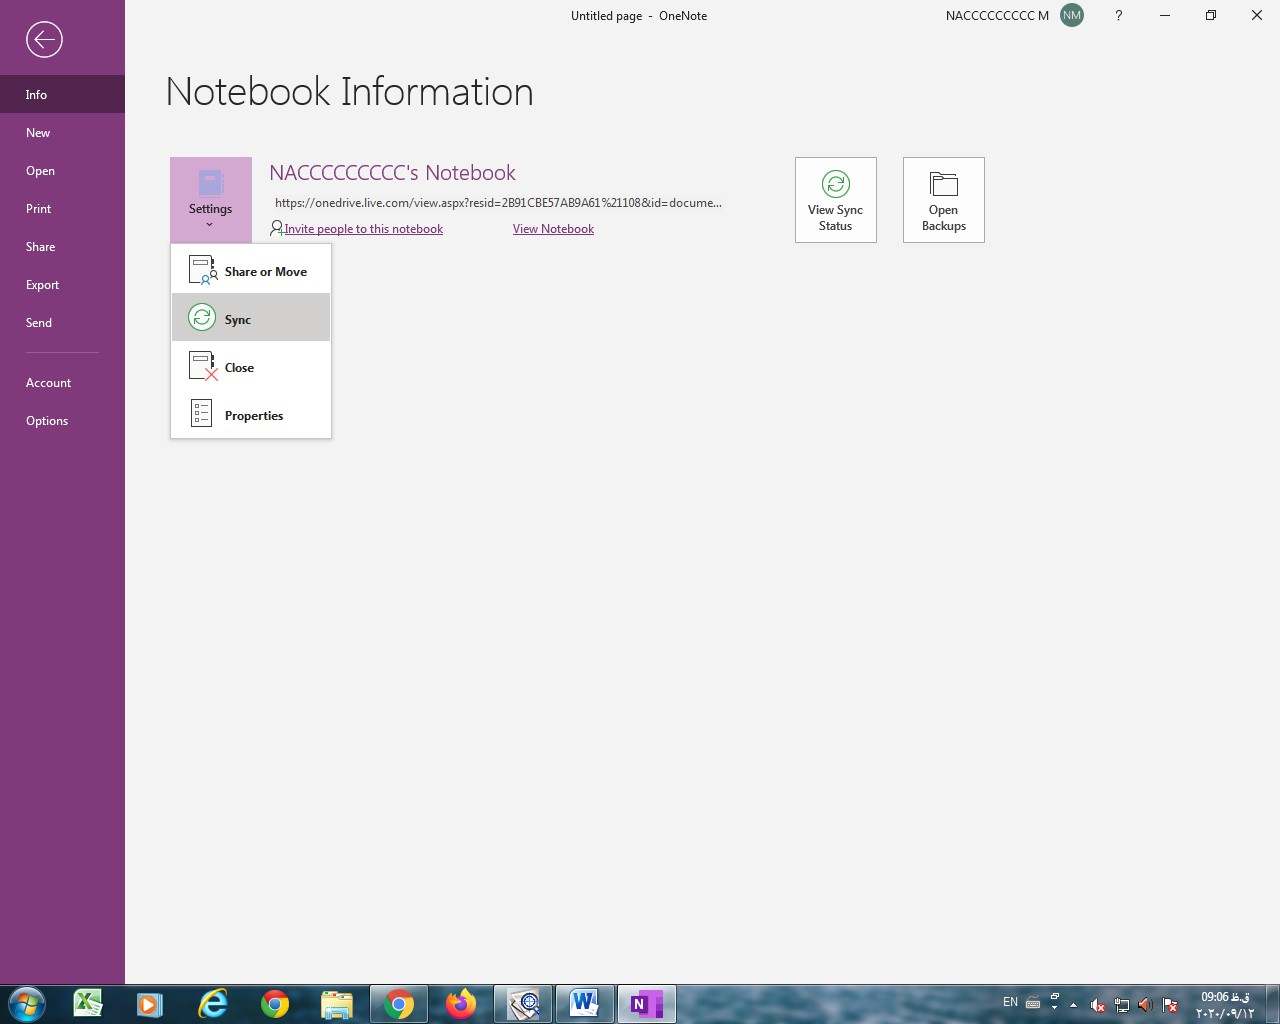 How to share a OneNote notebook